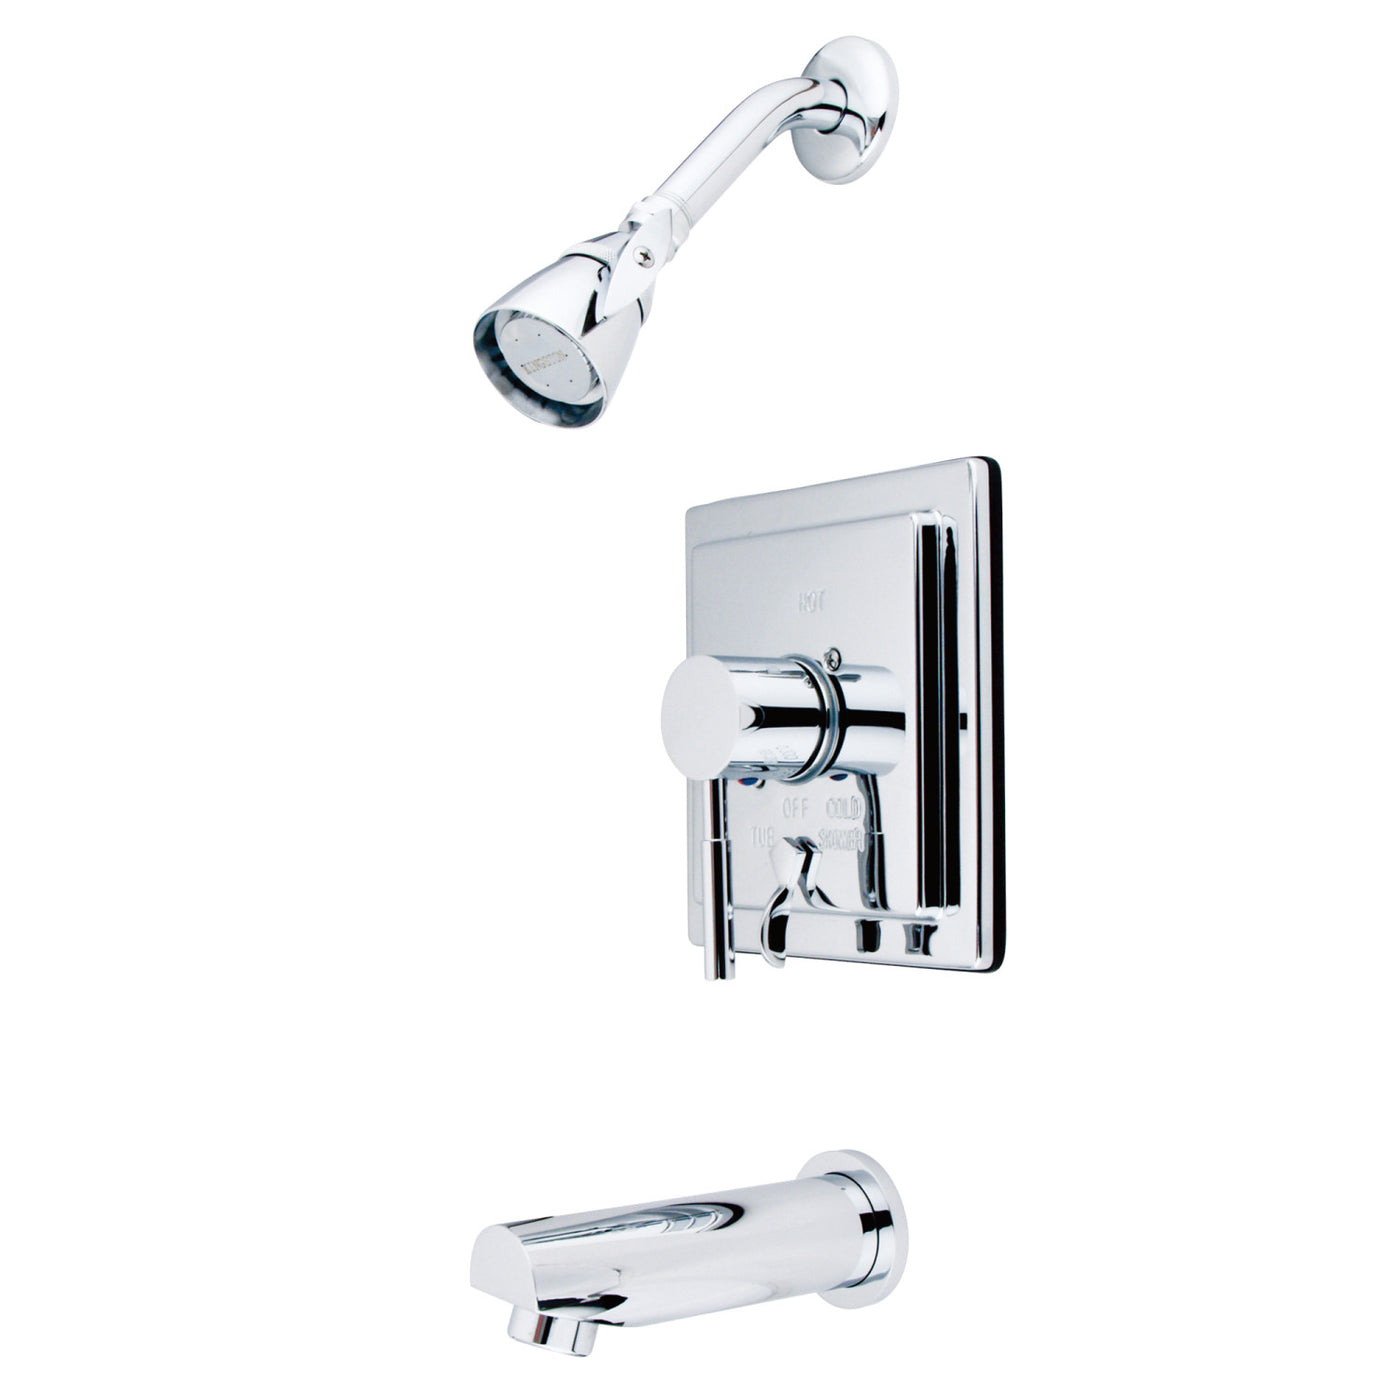 Elements of Design EB86510DL Single-Handle Tub and Shower Faucet, Polished Chrome